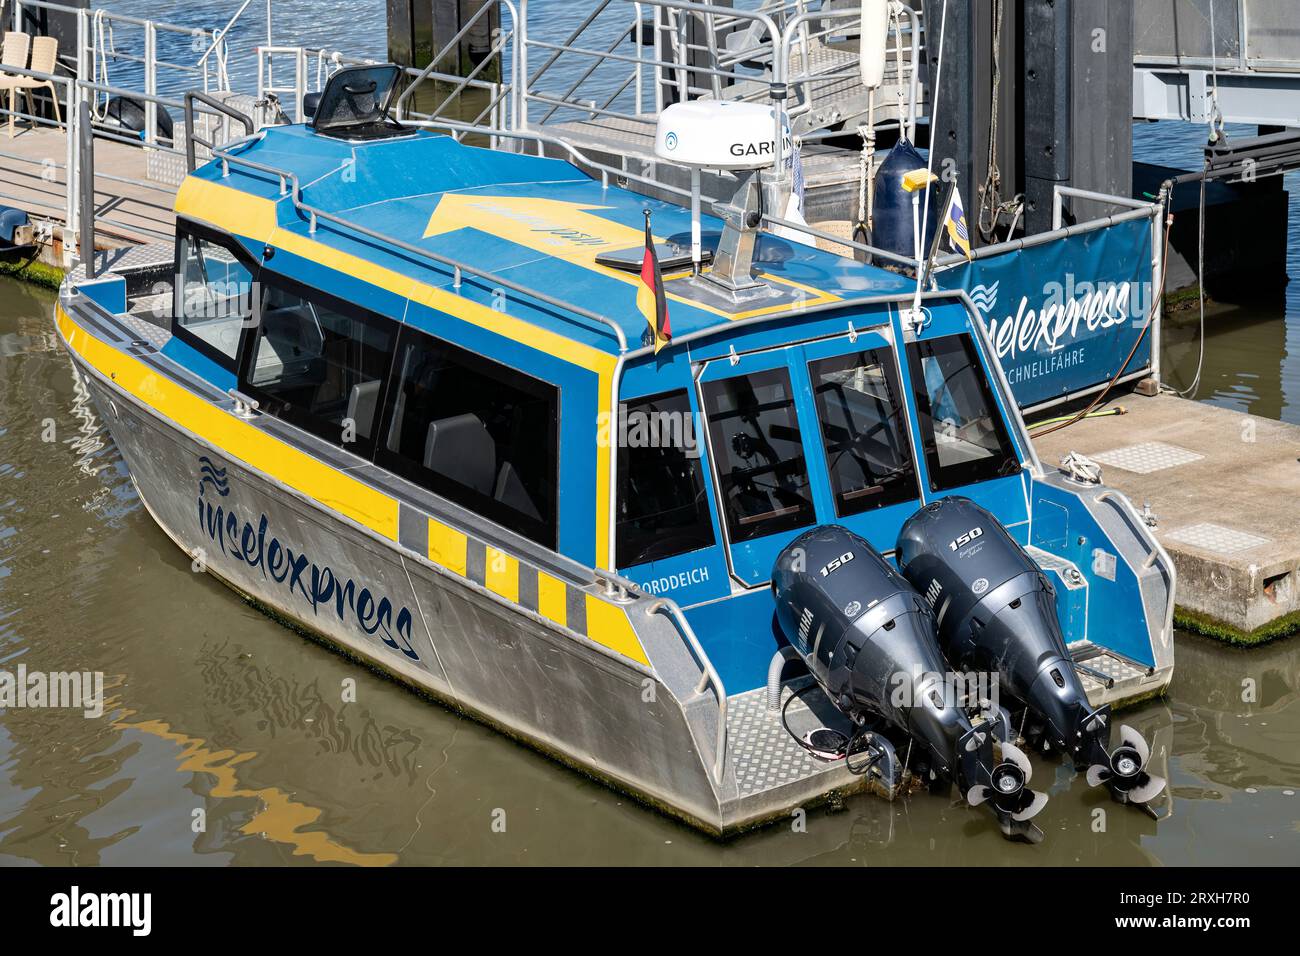 Inselexpress  ferry in the port of Norddeich, Germany Stock Photo